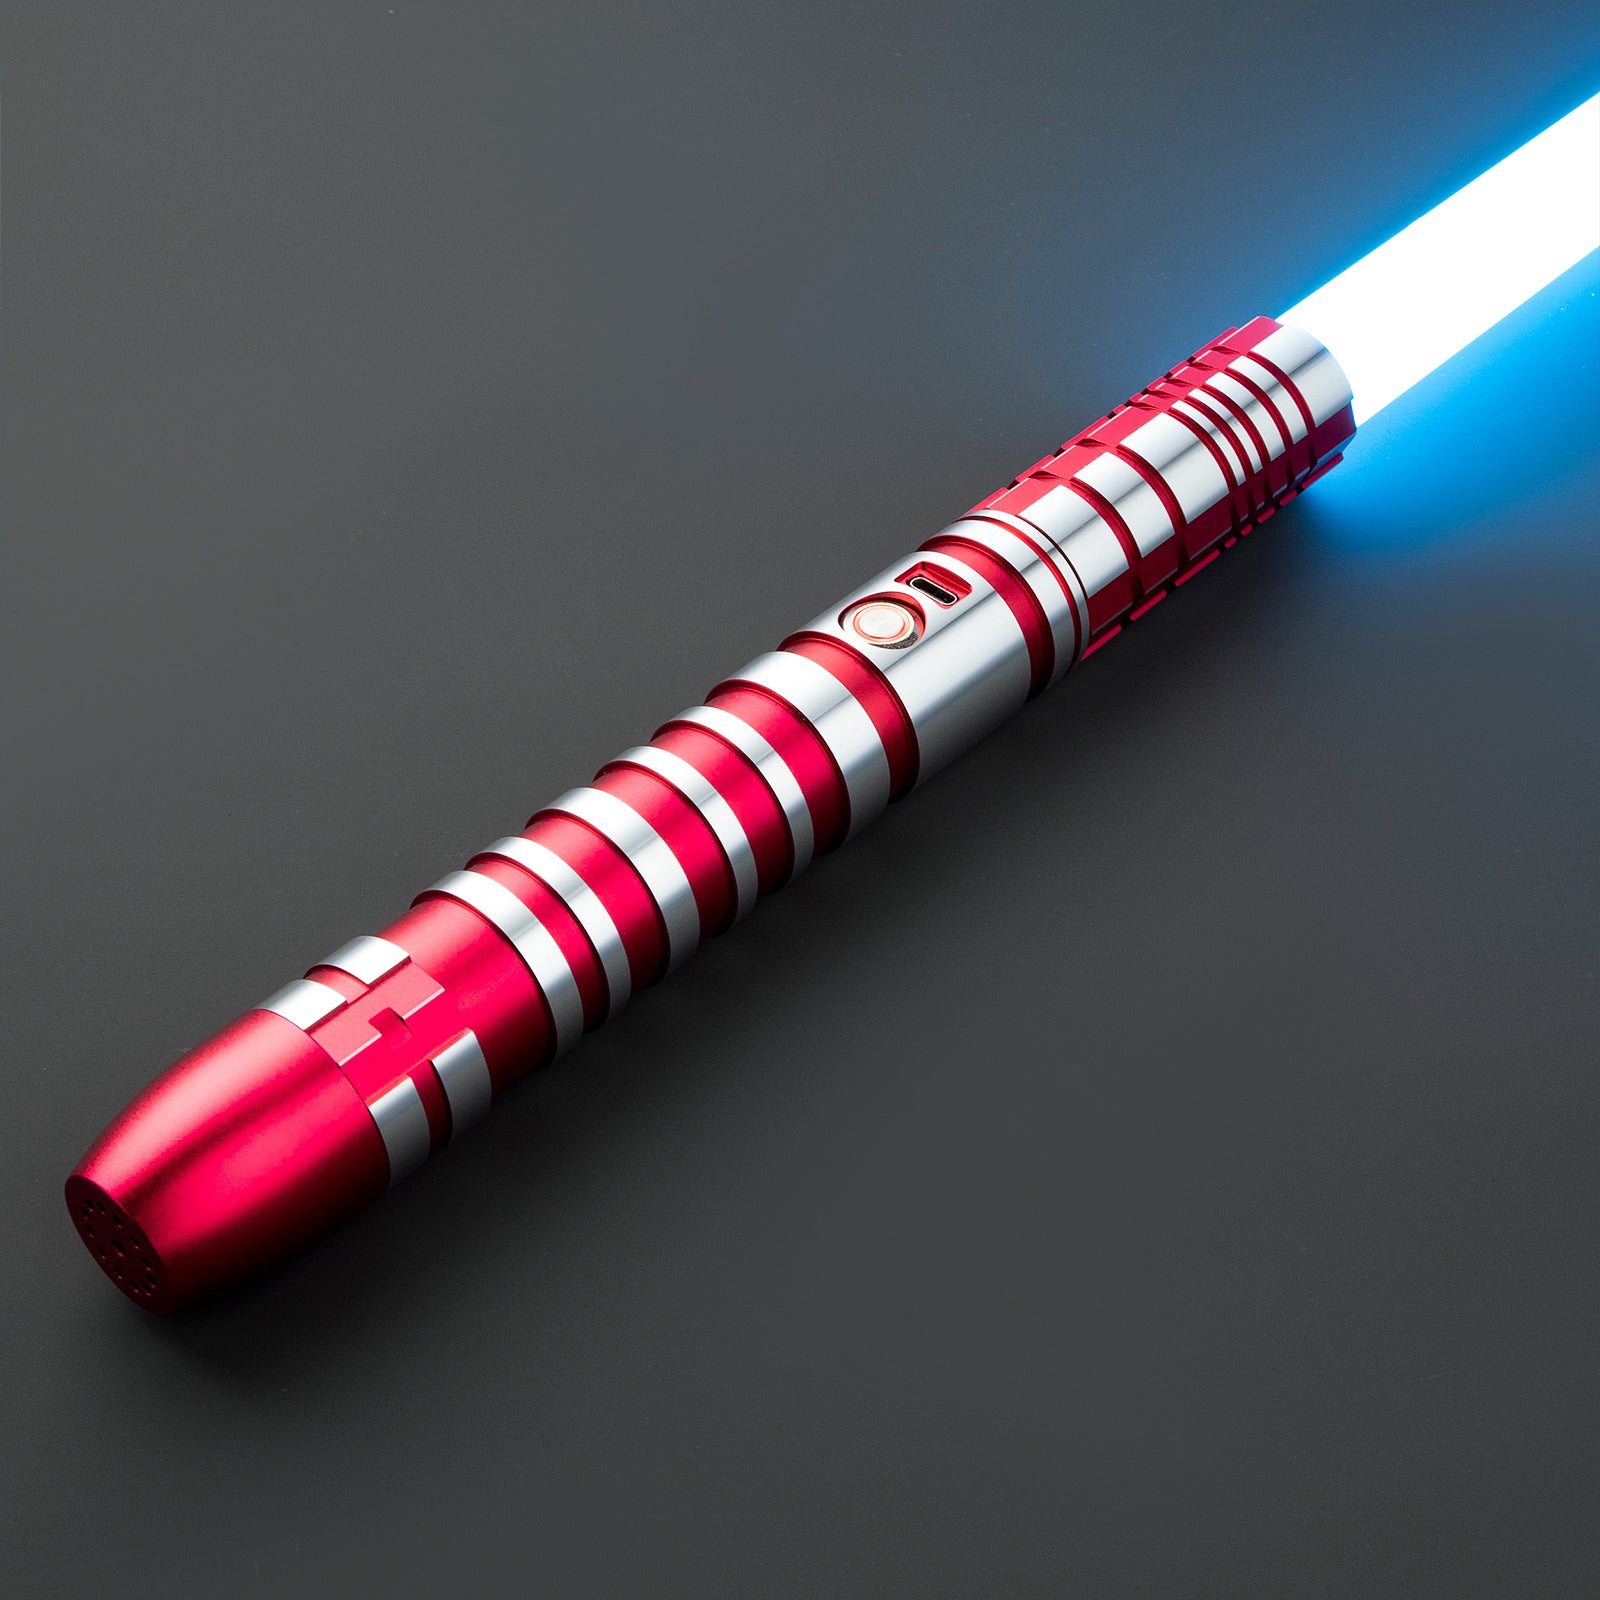 The Armored Lightsaber